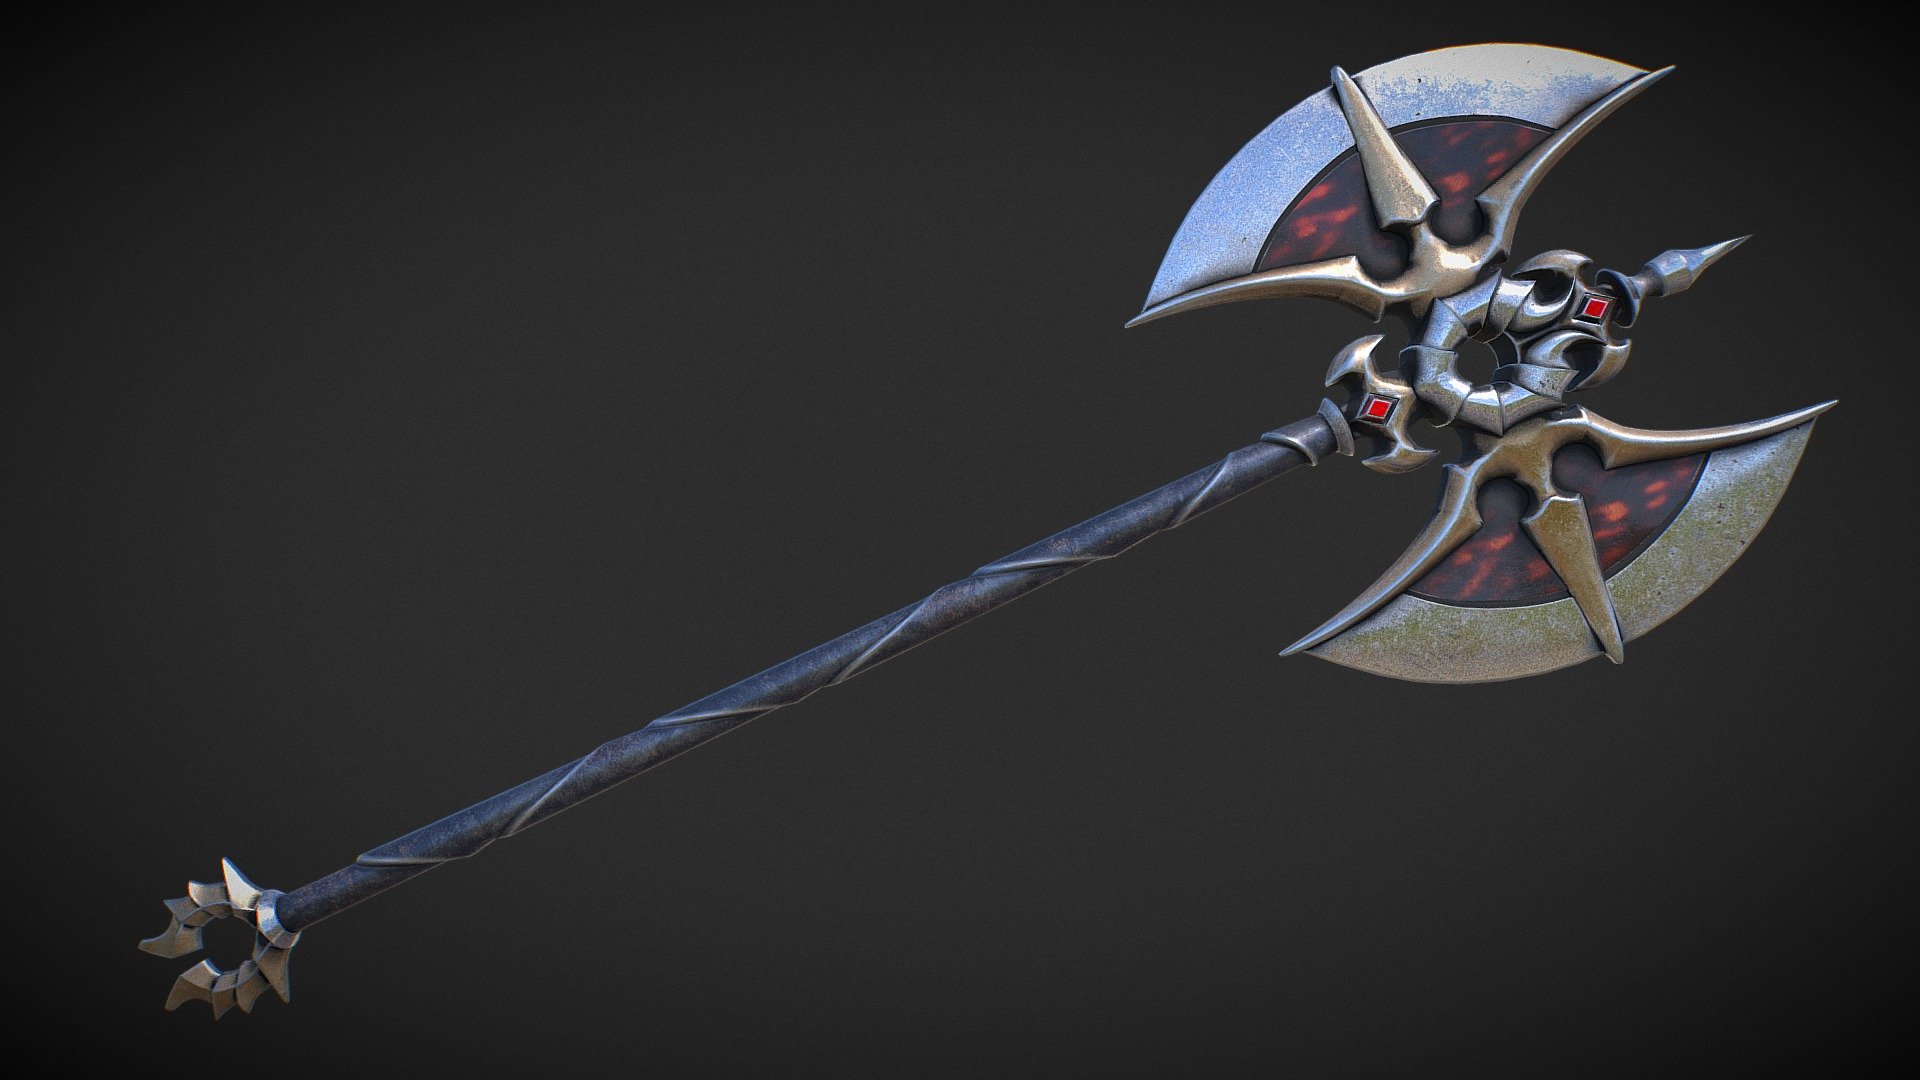 Hello. This is a high definition quality polygon of a Fantasy axe 3D Model with PBR textures. Extremely detailed and realistic. Suitable for movie prop, architectural visualizations, advertising renders and other. The archive includes Obj and FBX, textures for the Unity: Base color, Height, Metallic, Mixed AO, Normal_OpenGL, Roughness. And also included in the archive textures for UE: BaseColor, Normal, OcclusionRoughnessMetallic. All textures are 4k resolution. The model contains 1 object: Fantasy_axe. If you need, we will make a file of this model for 3D printing especially for you 3d model